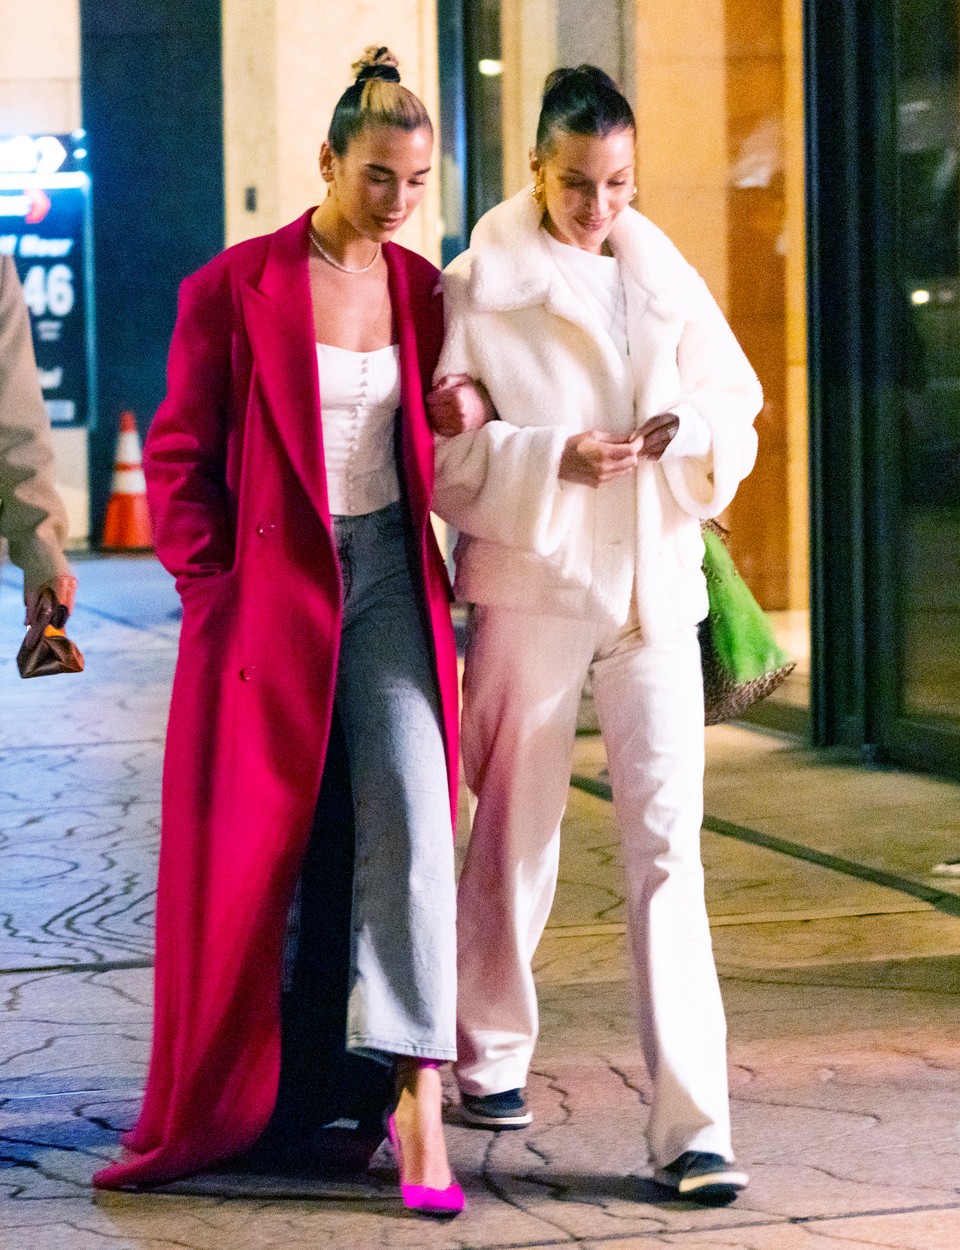 01/11/2020 First shots of Zayn Malik and Gigi Hadid back together again after splitting up last year. The couple reunited to celebrate Yolanda Foster's birthday and were joined by Dua Lipa and Bella Hadid, Image: 492305204, License: Rights-managed, Restrictions: NO usage without agreed price and terms. Please contact sales@theimagedirect.com, Model Release: no, Credit line: TheImageDirect.com / The Image Direct / Profimedia